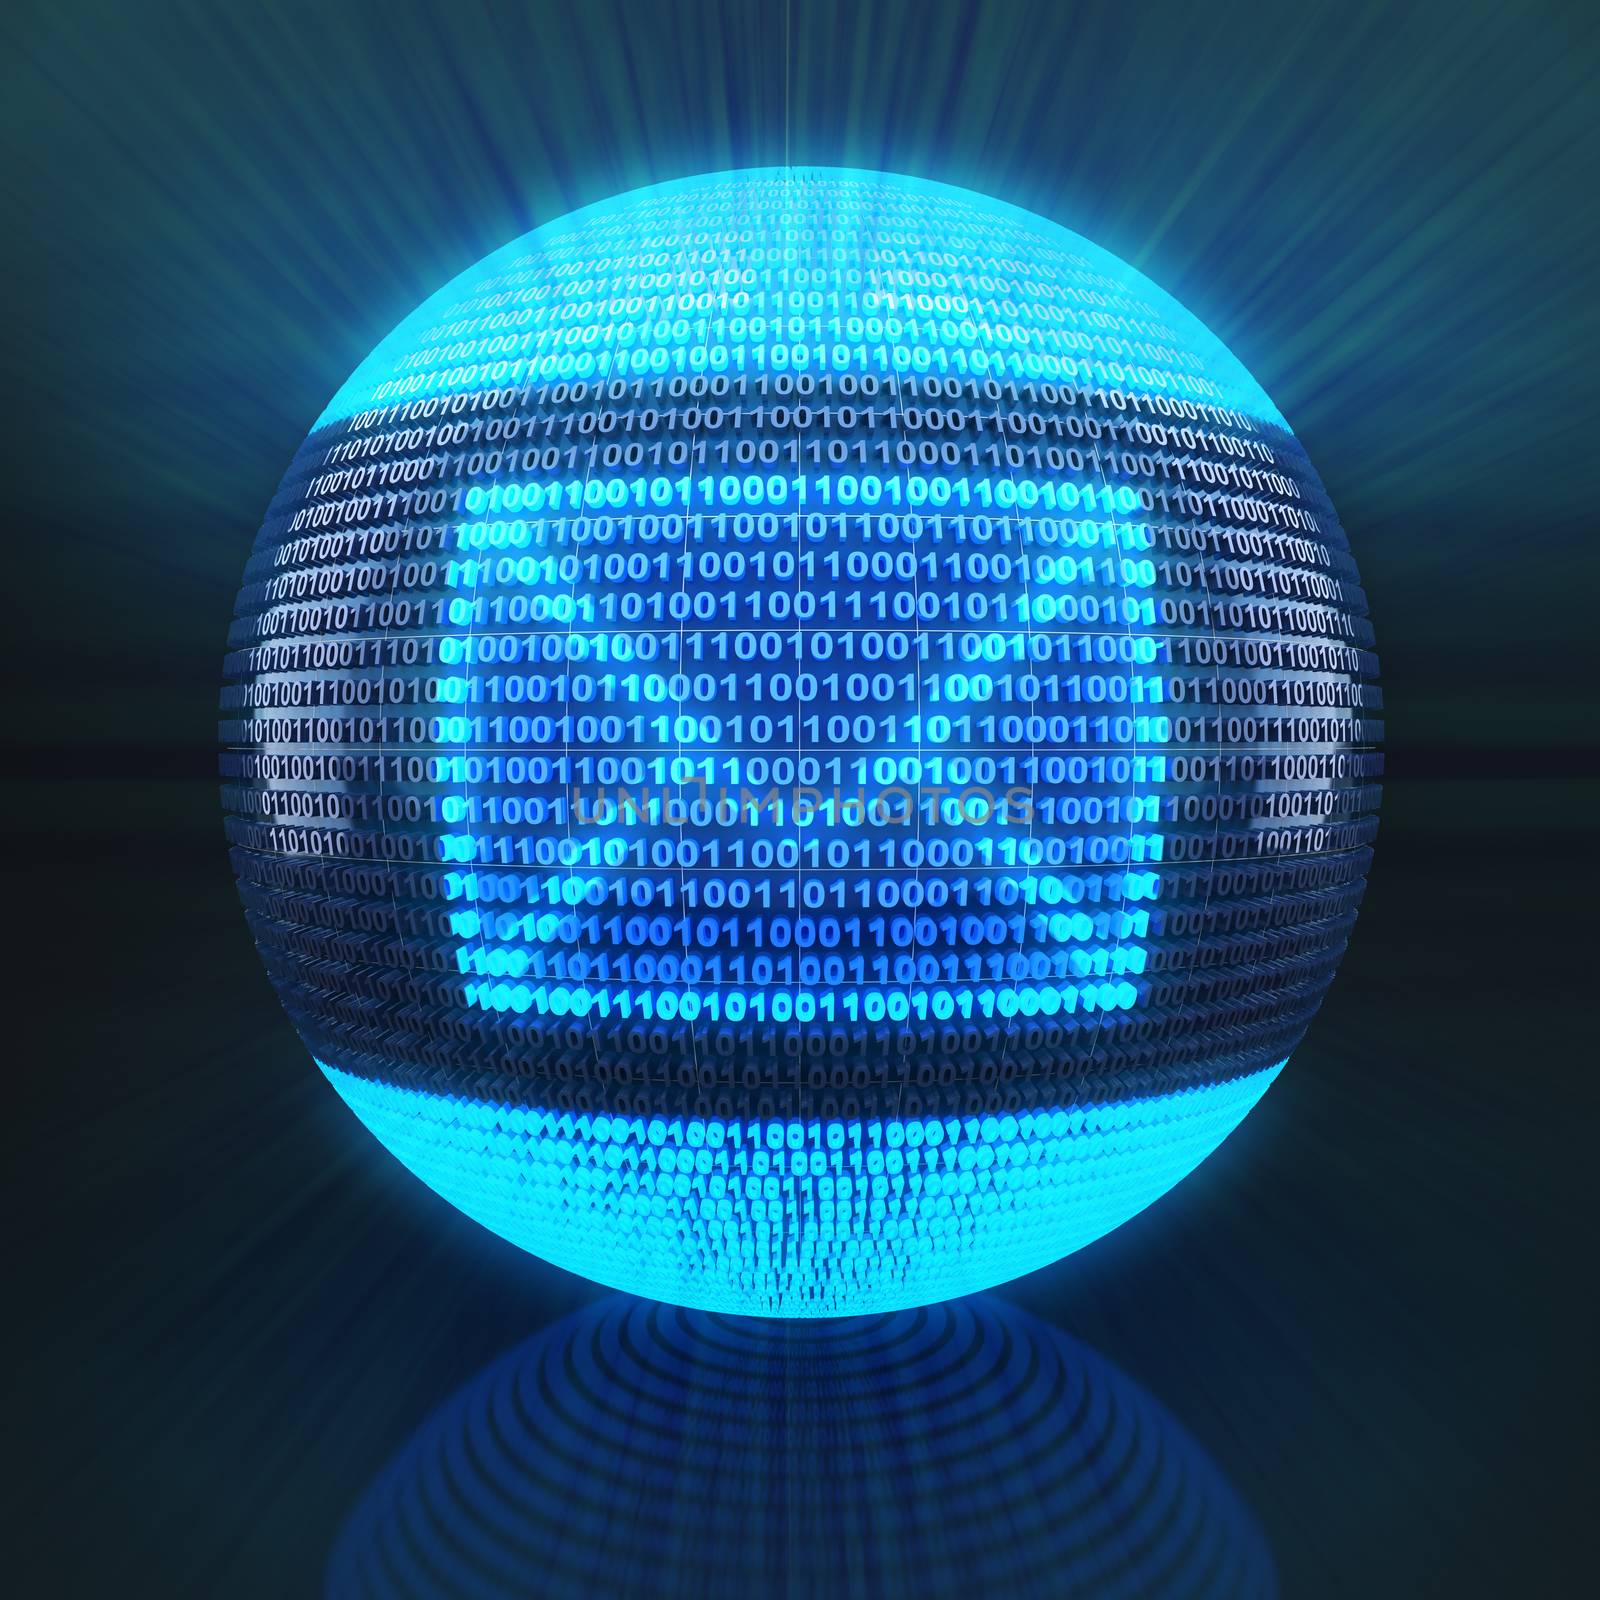 Email symbol on globe formed by binary code by ymgerman